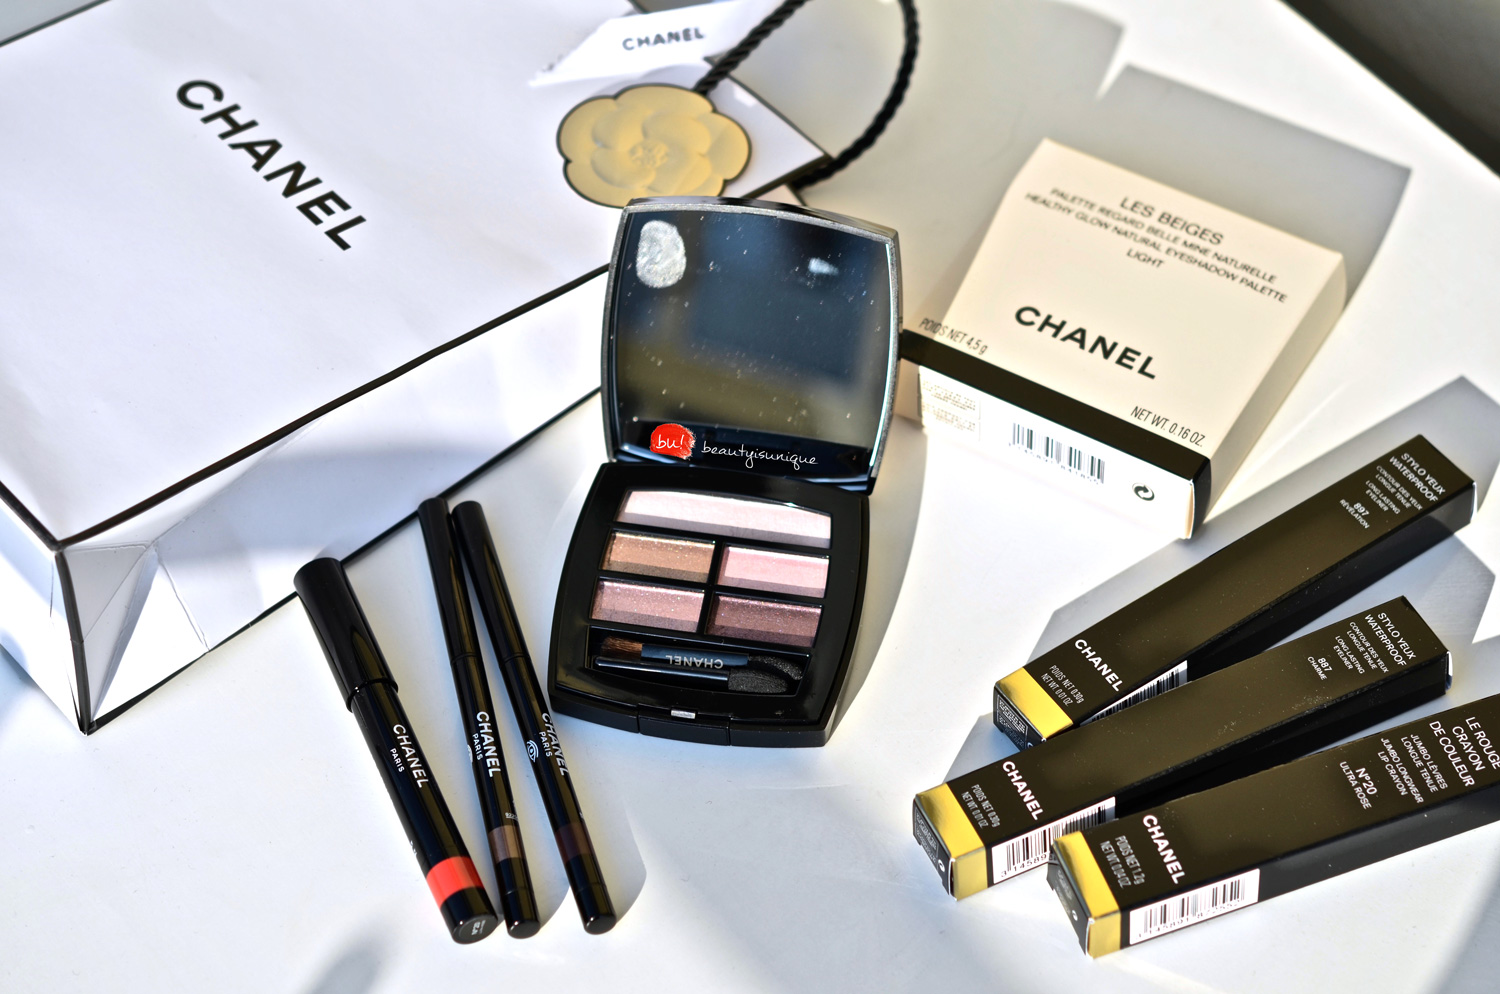 Chanel Cruise Collection 2018 & Les Beiges Eyeshadow Palette